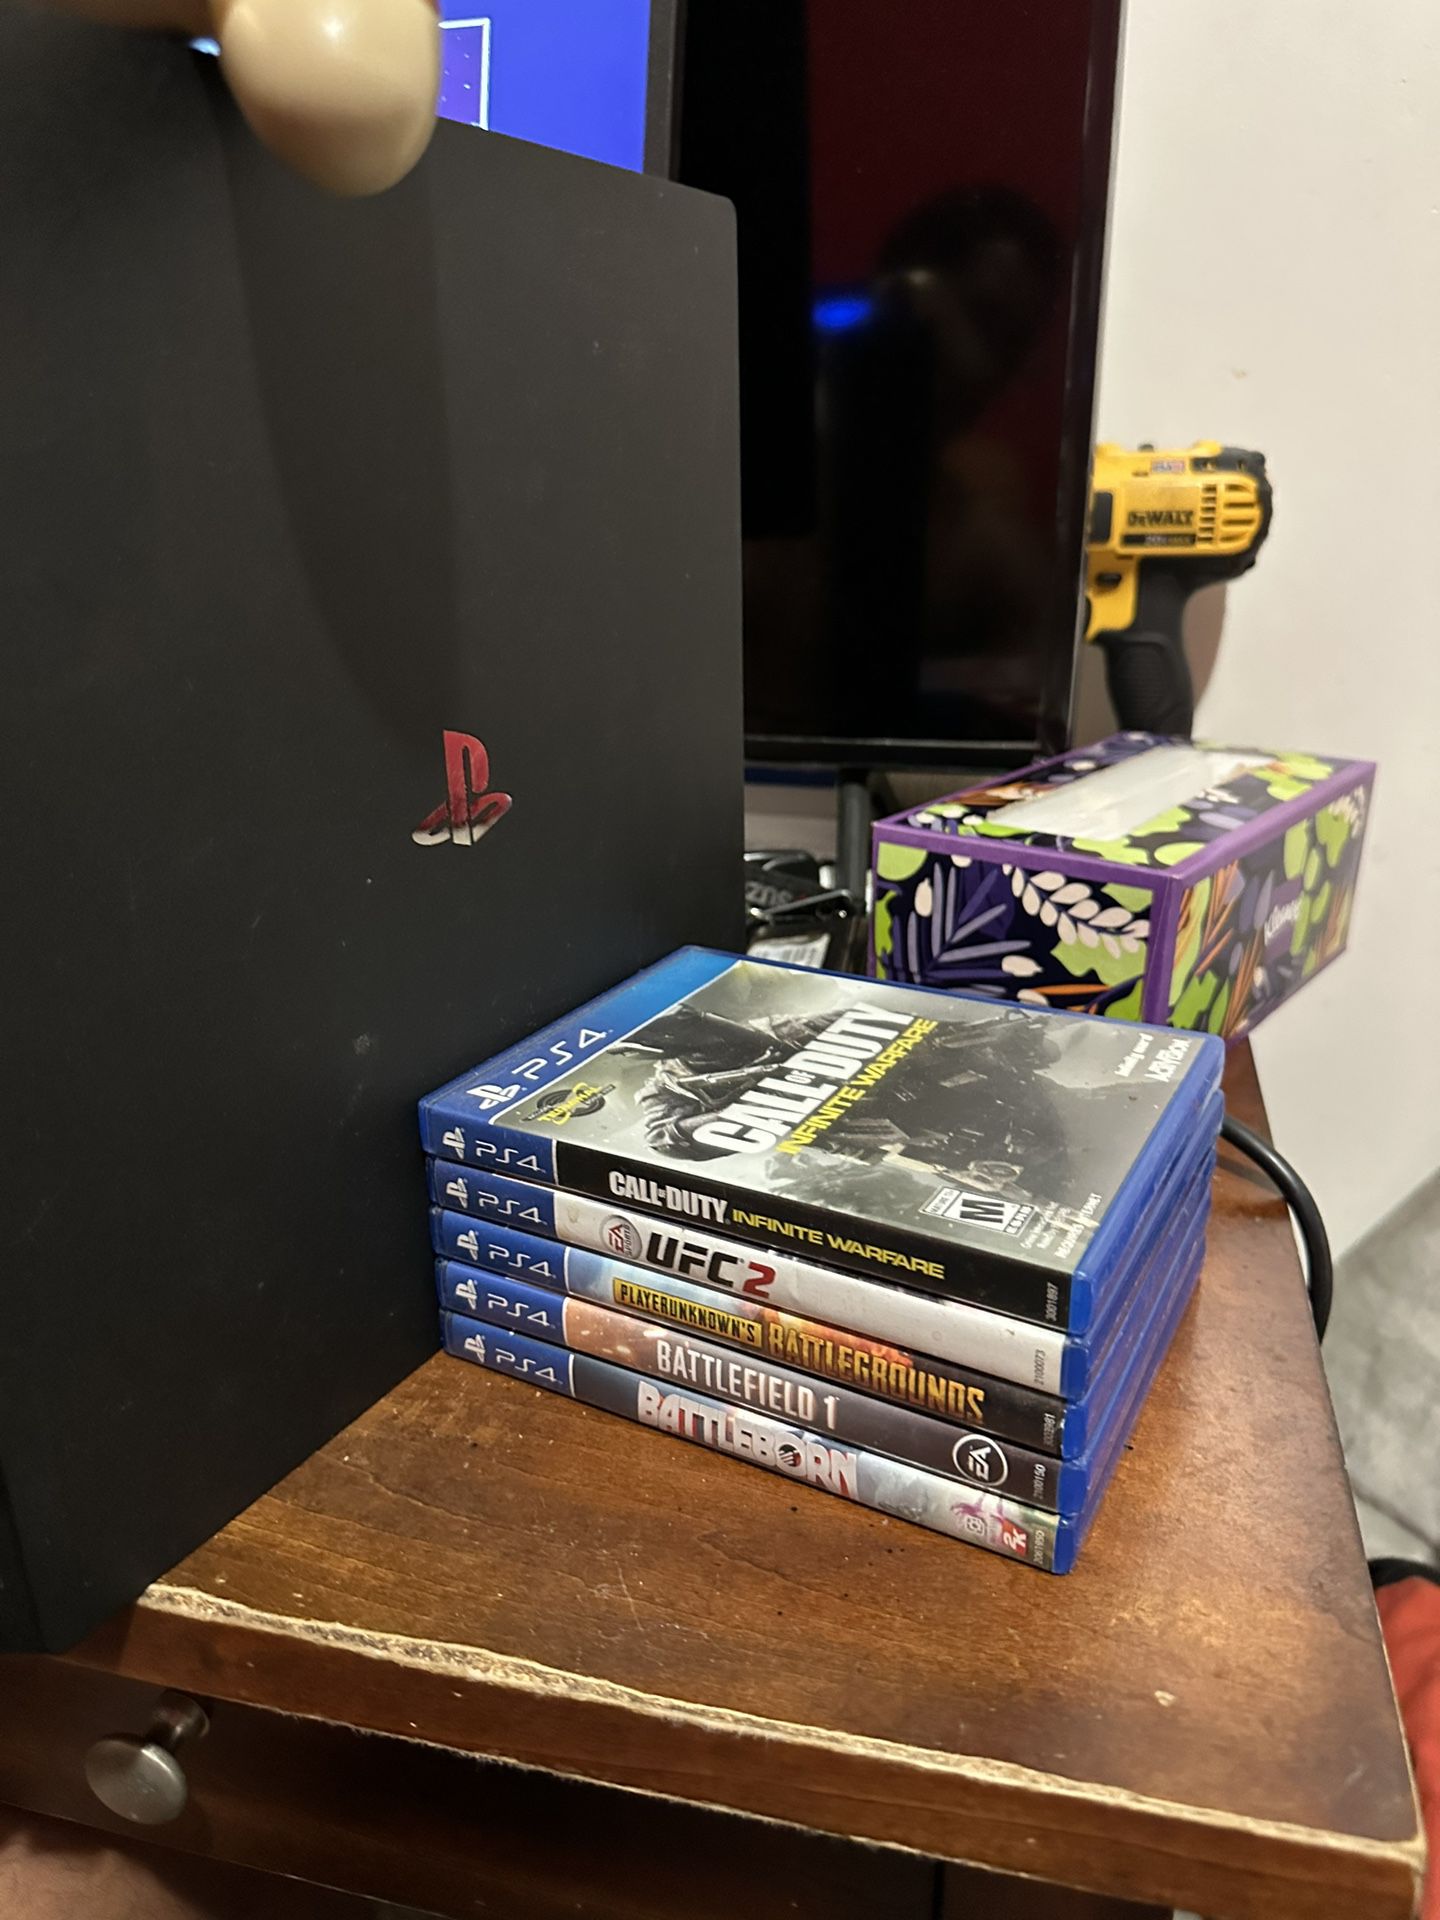 Sony Playstation Ps4 Pro 1tb Console Bundle With Games And Good Controllers  for Sale in Queens, NY - OfferUp